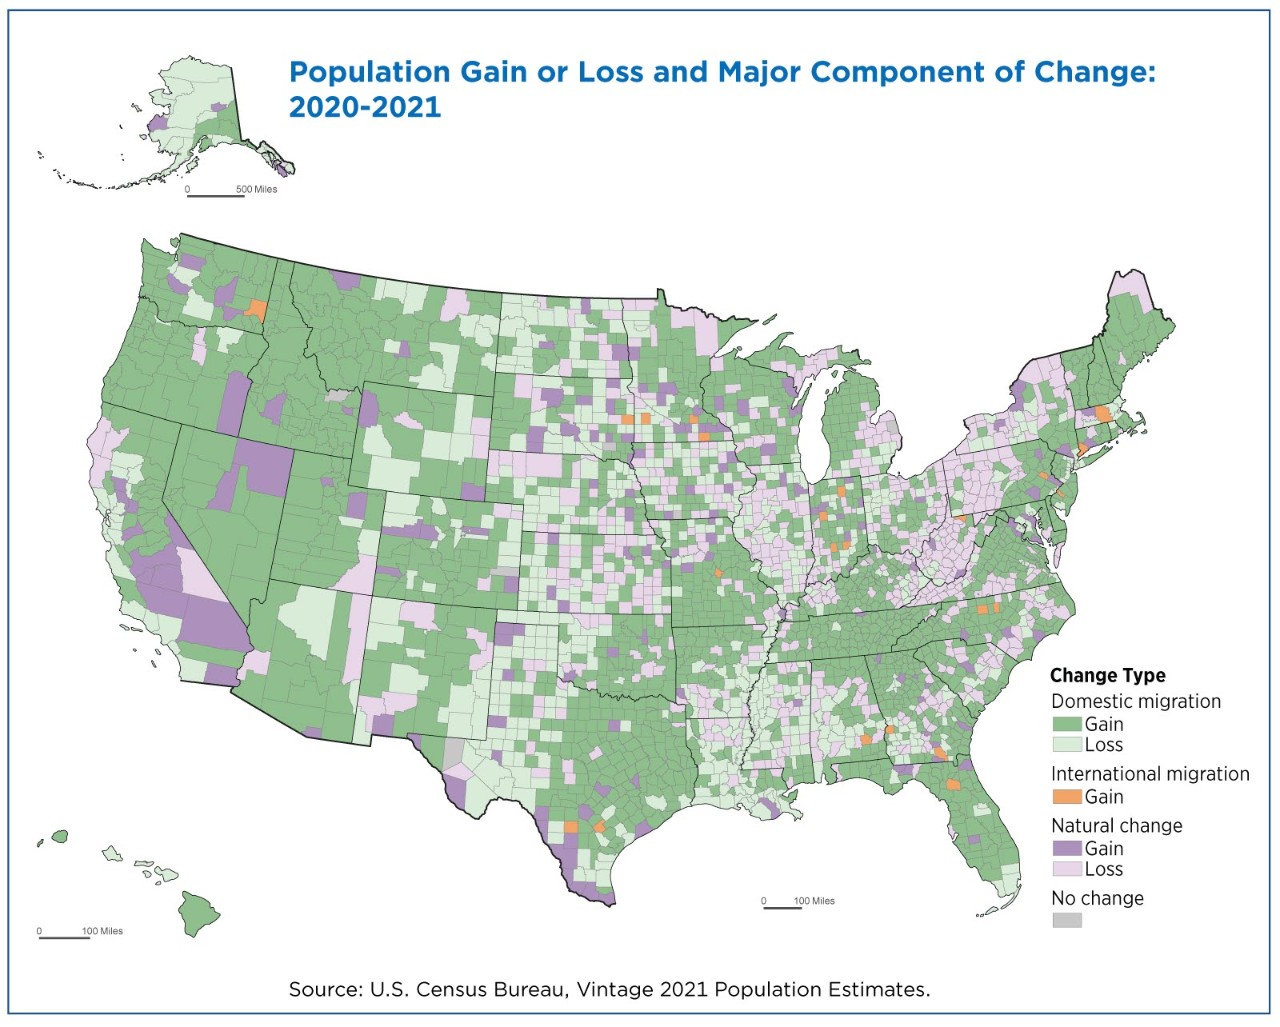 Population gain or loss and major component of change: 2020-2021